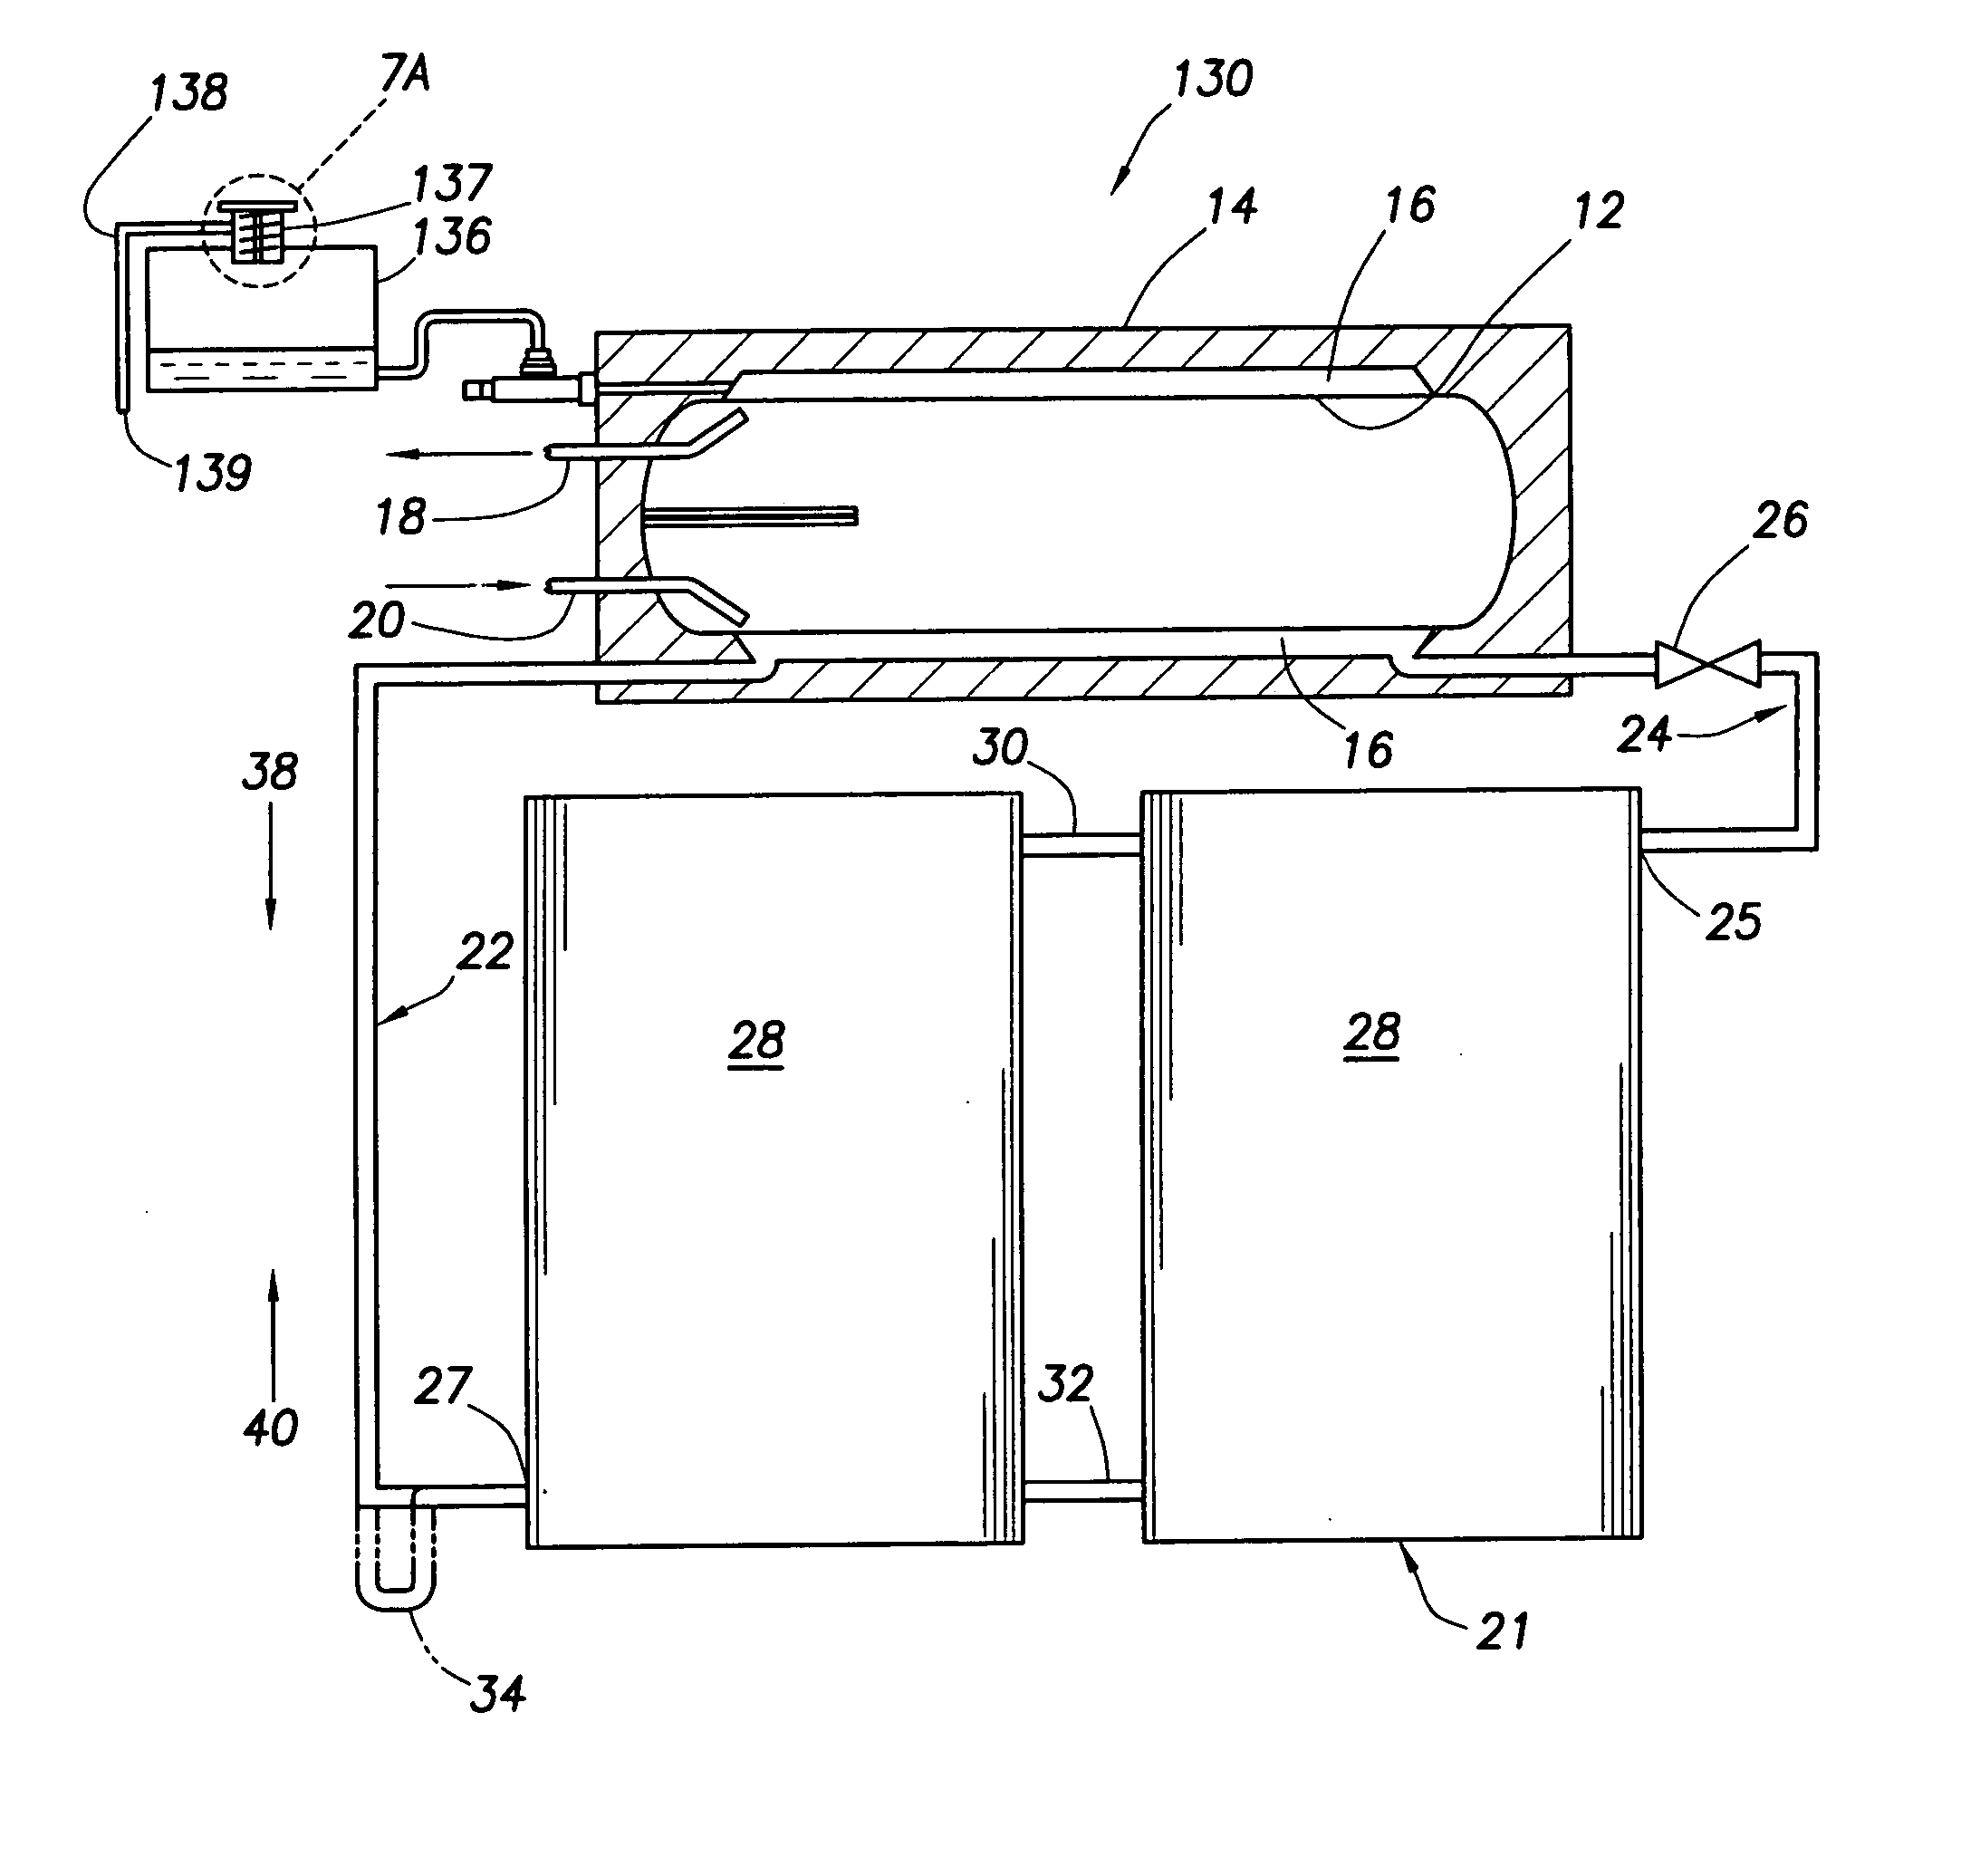 Protection system for a solar water heating system